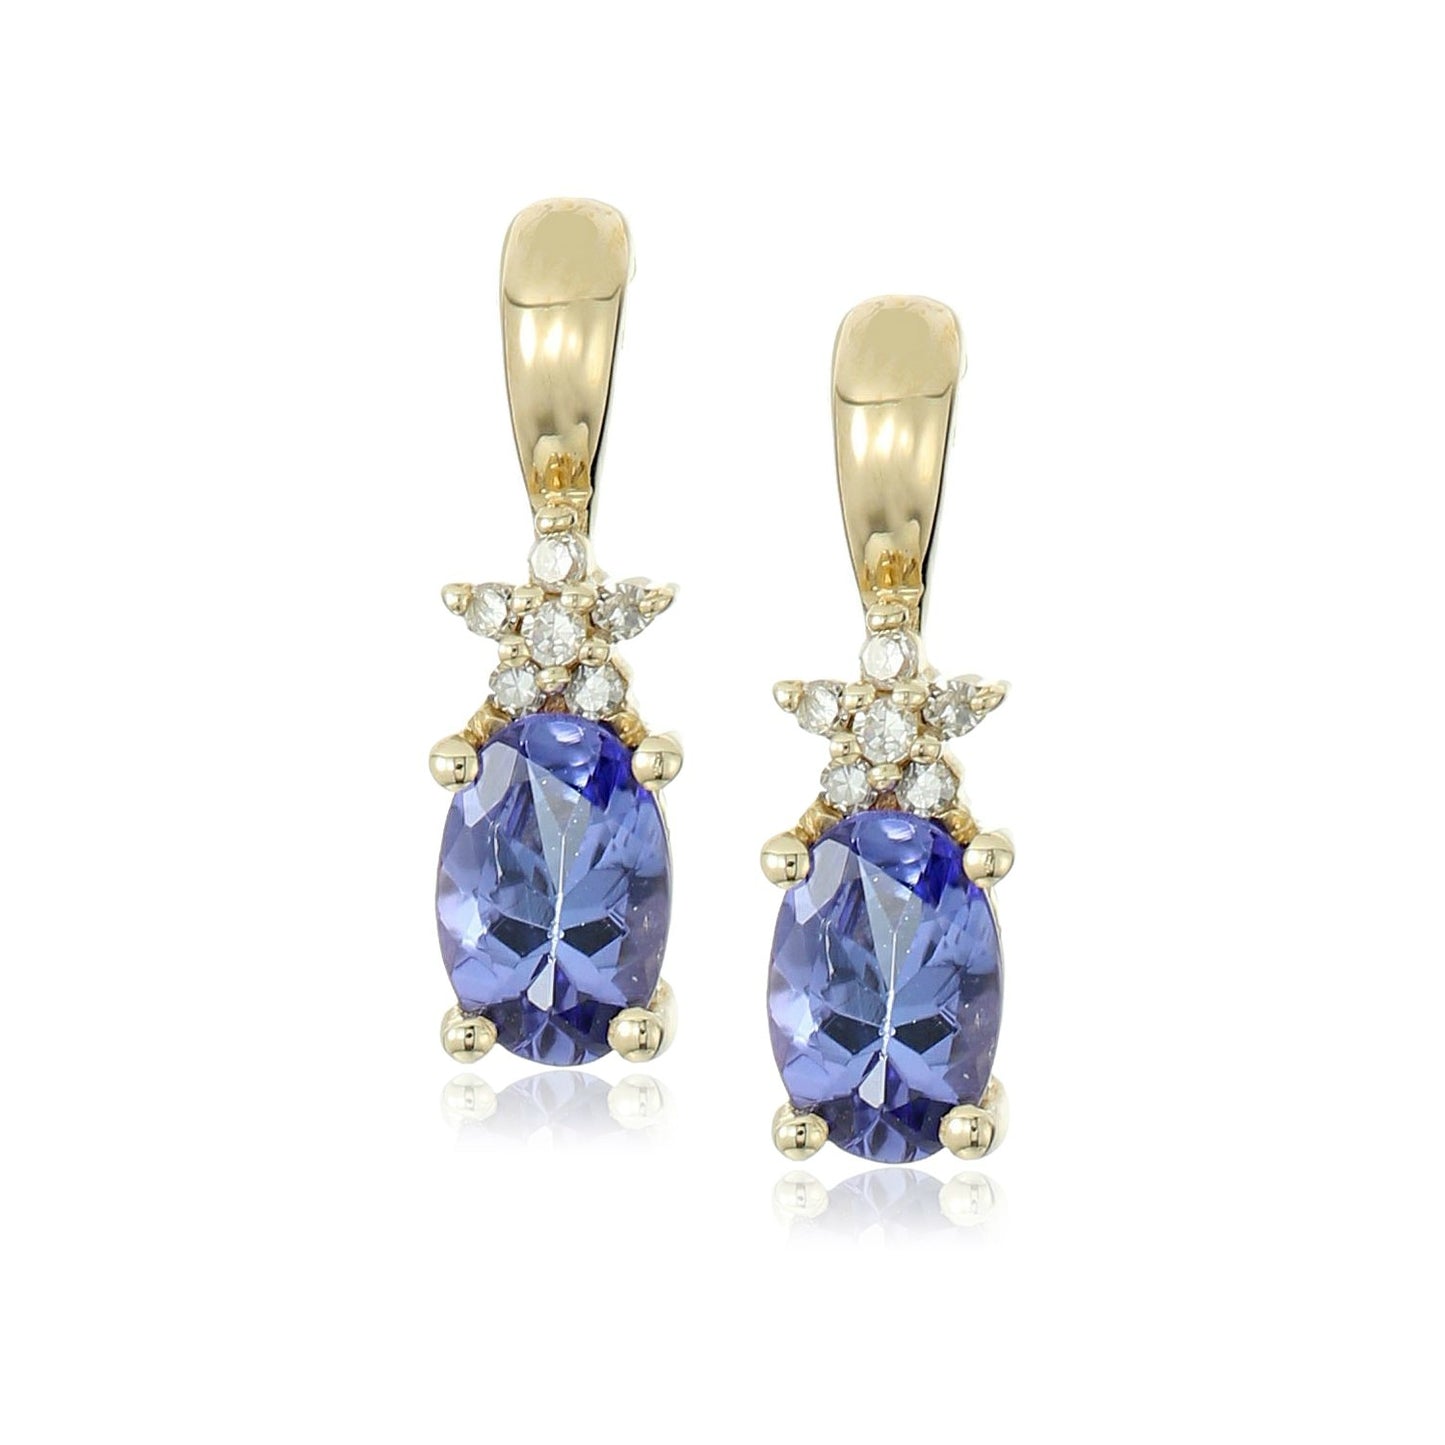 10k Yellow Gold Tanzanite and Diamond Accented Stud Earrings - pinctore